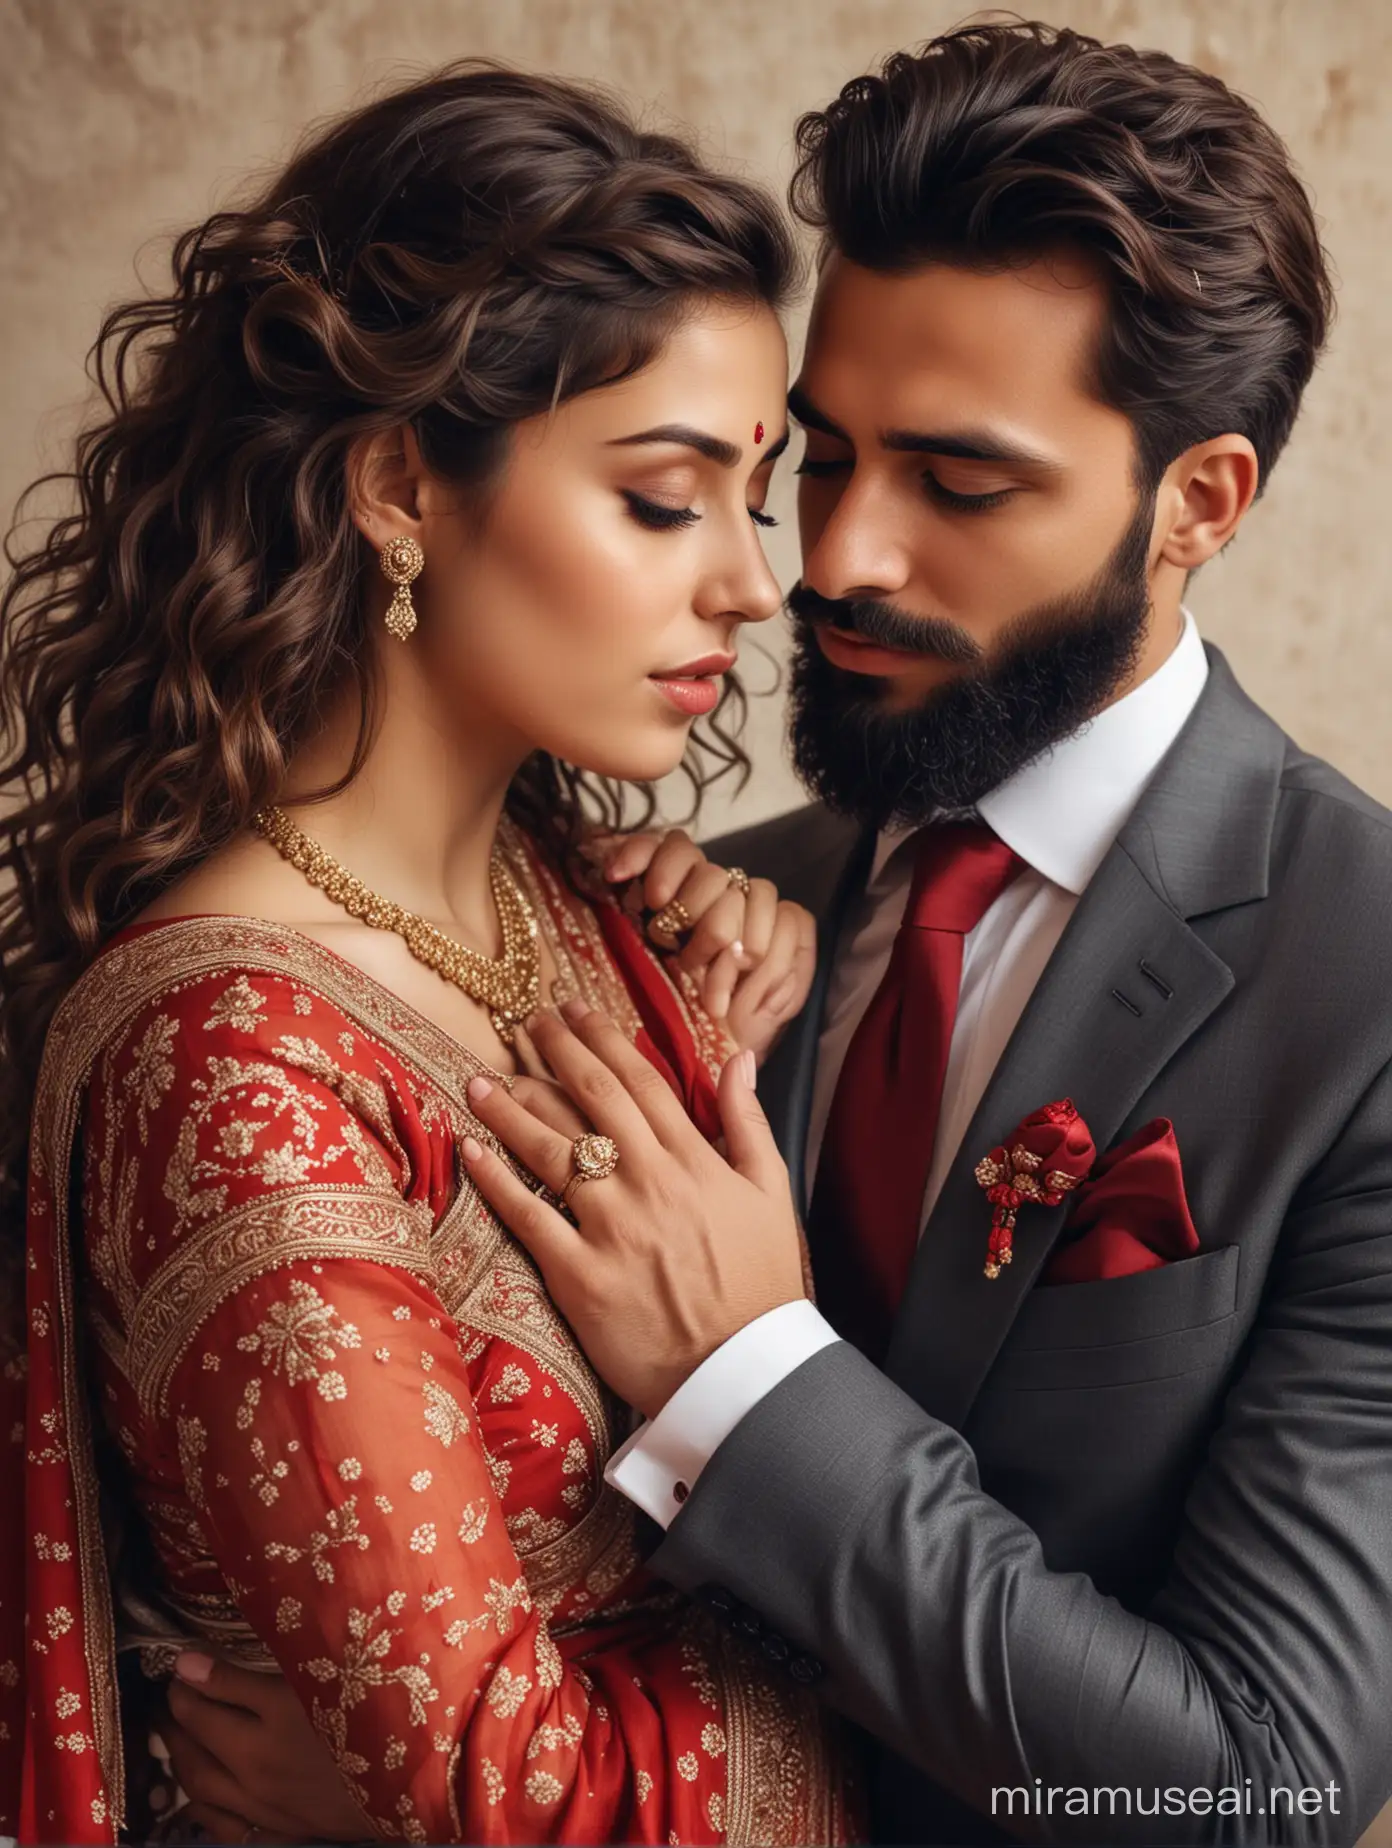 full portrait photo of most beautiful european couple as most beautiful indian couple, 28 mm lens, waist shot, most beautiful cute girl in elegant saree, wide black eyes, full face, girl has long curly hair falling on breasts, full makeup, bridal makeup, red dot, full jewelry, hair ornaments, blouse low cut, girl embracing man and resting forehead on chest of man with deep emotion and ecstasy, man comforting girl with hands around her, man with stylish beard and perfect hair cut, suit and tie, photo realistic, 4K.